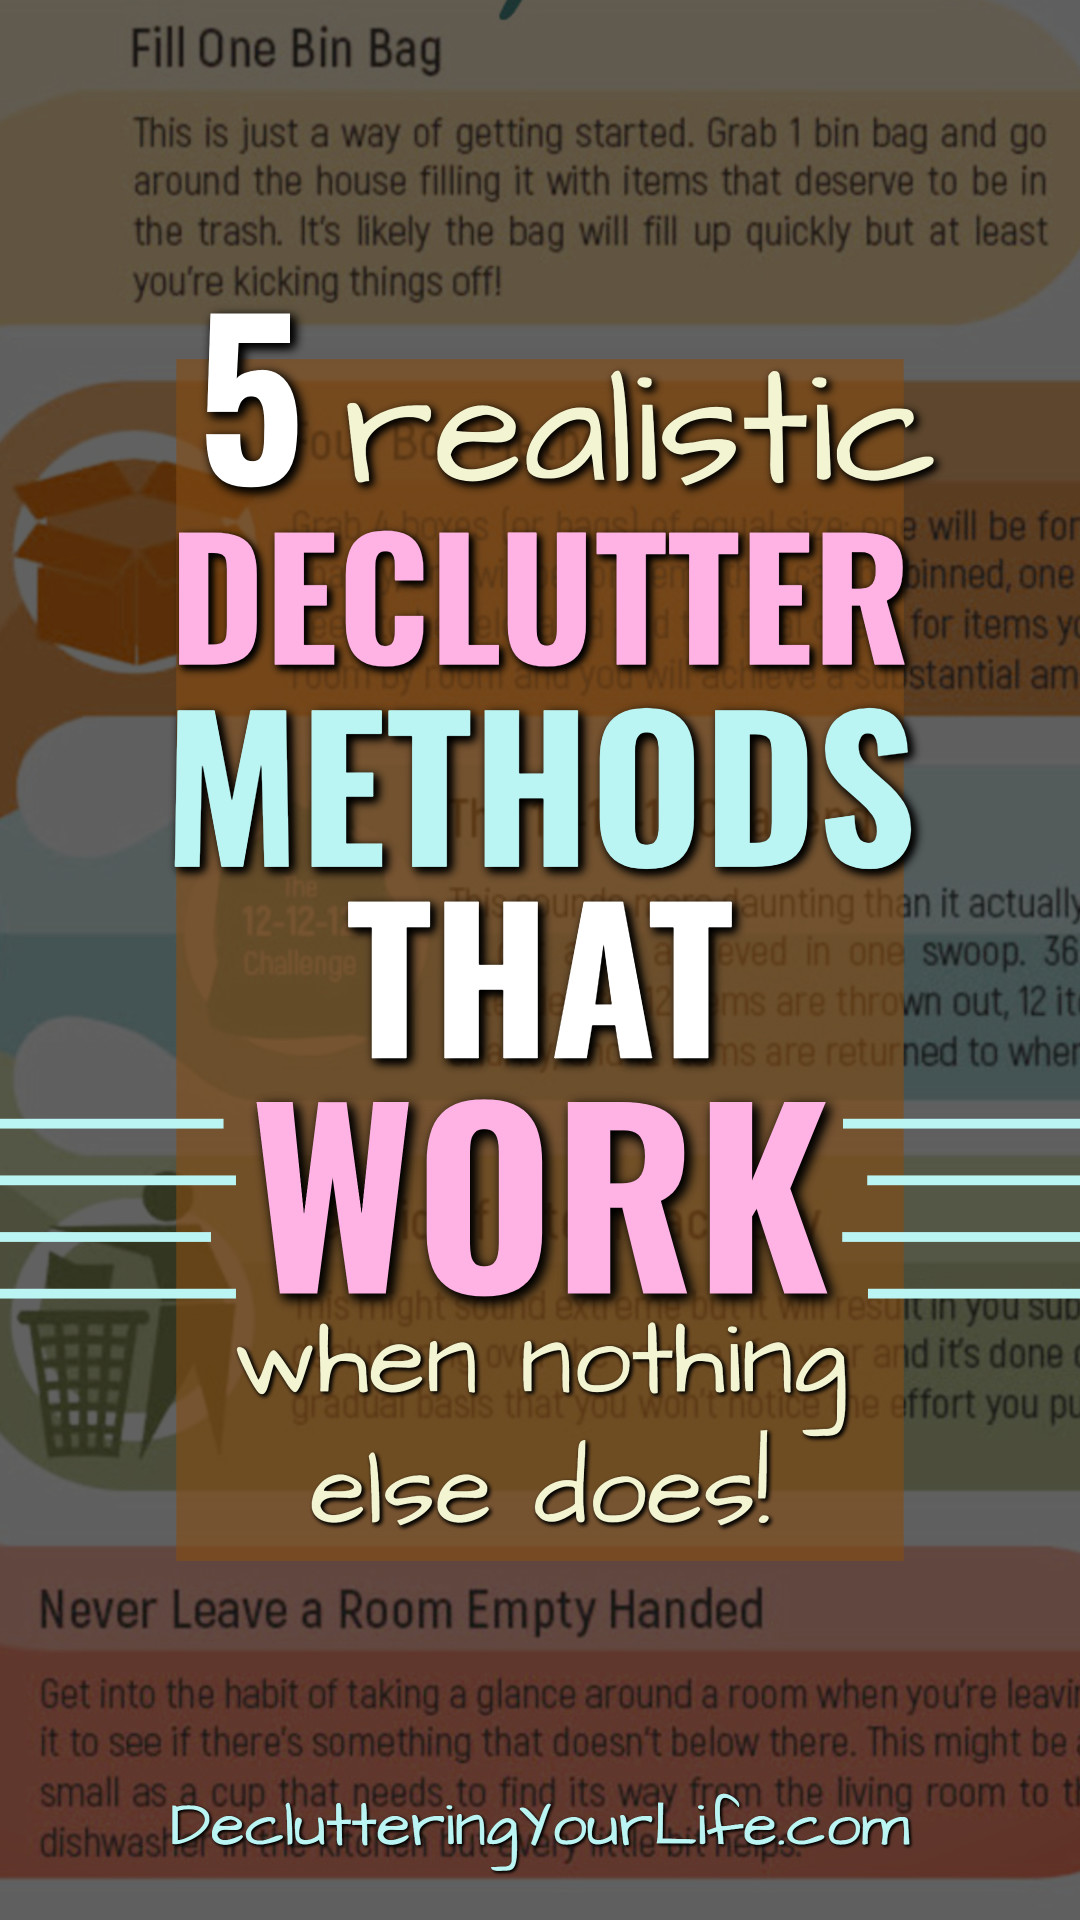 5 declutter methods that work when nothing else does